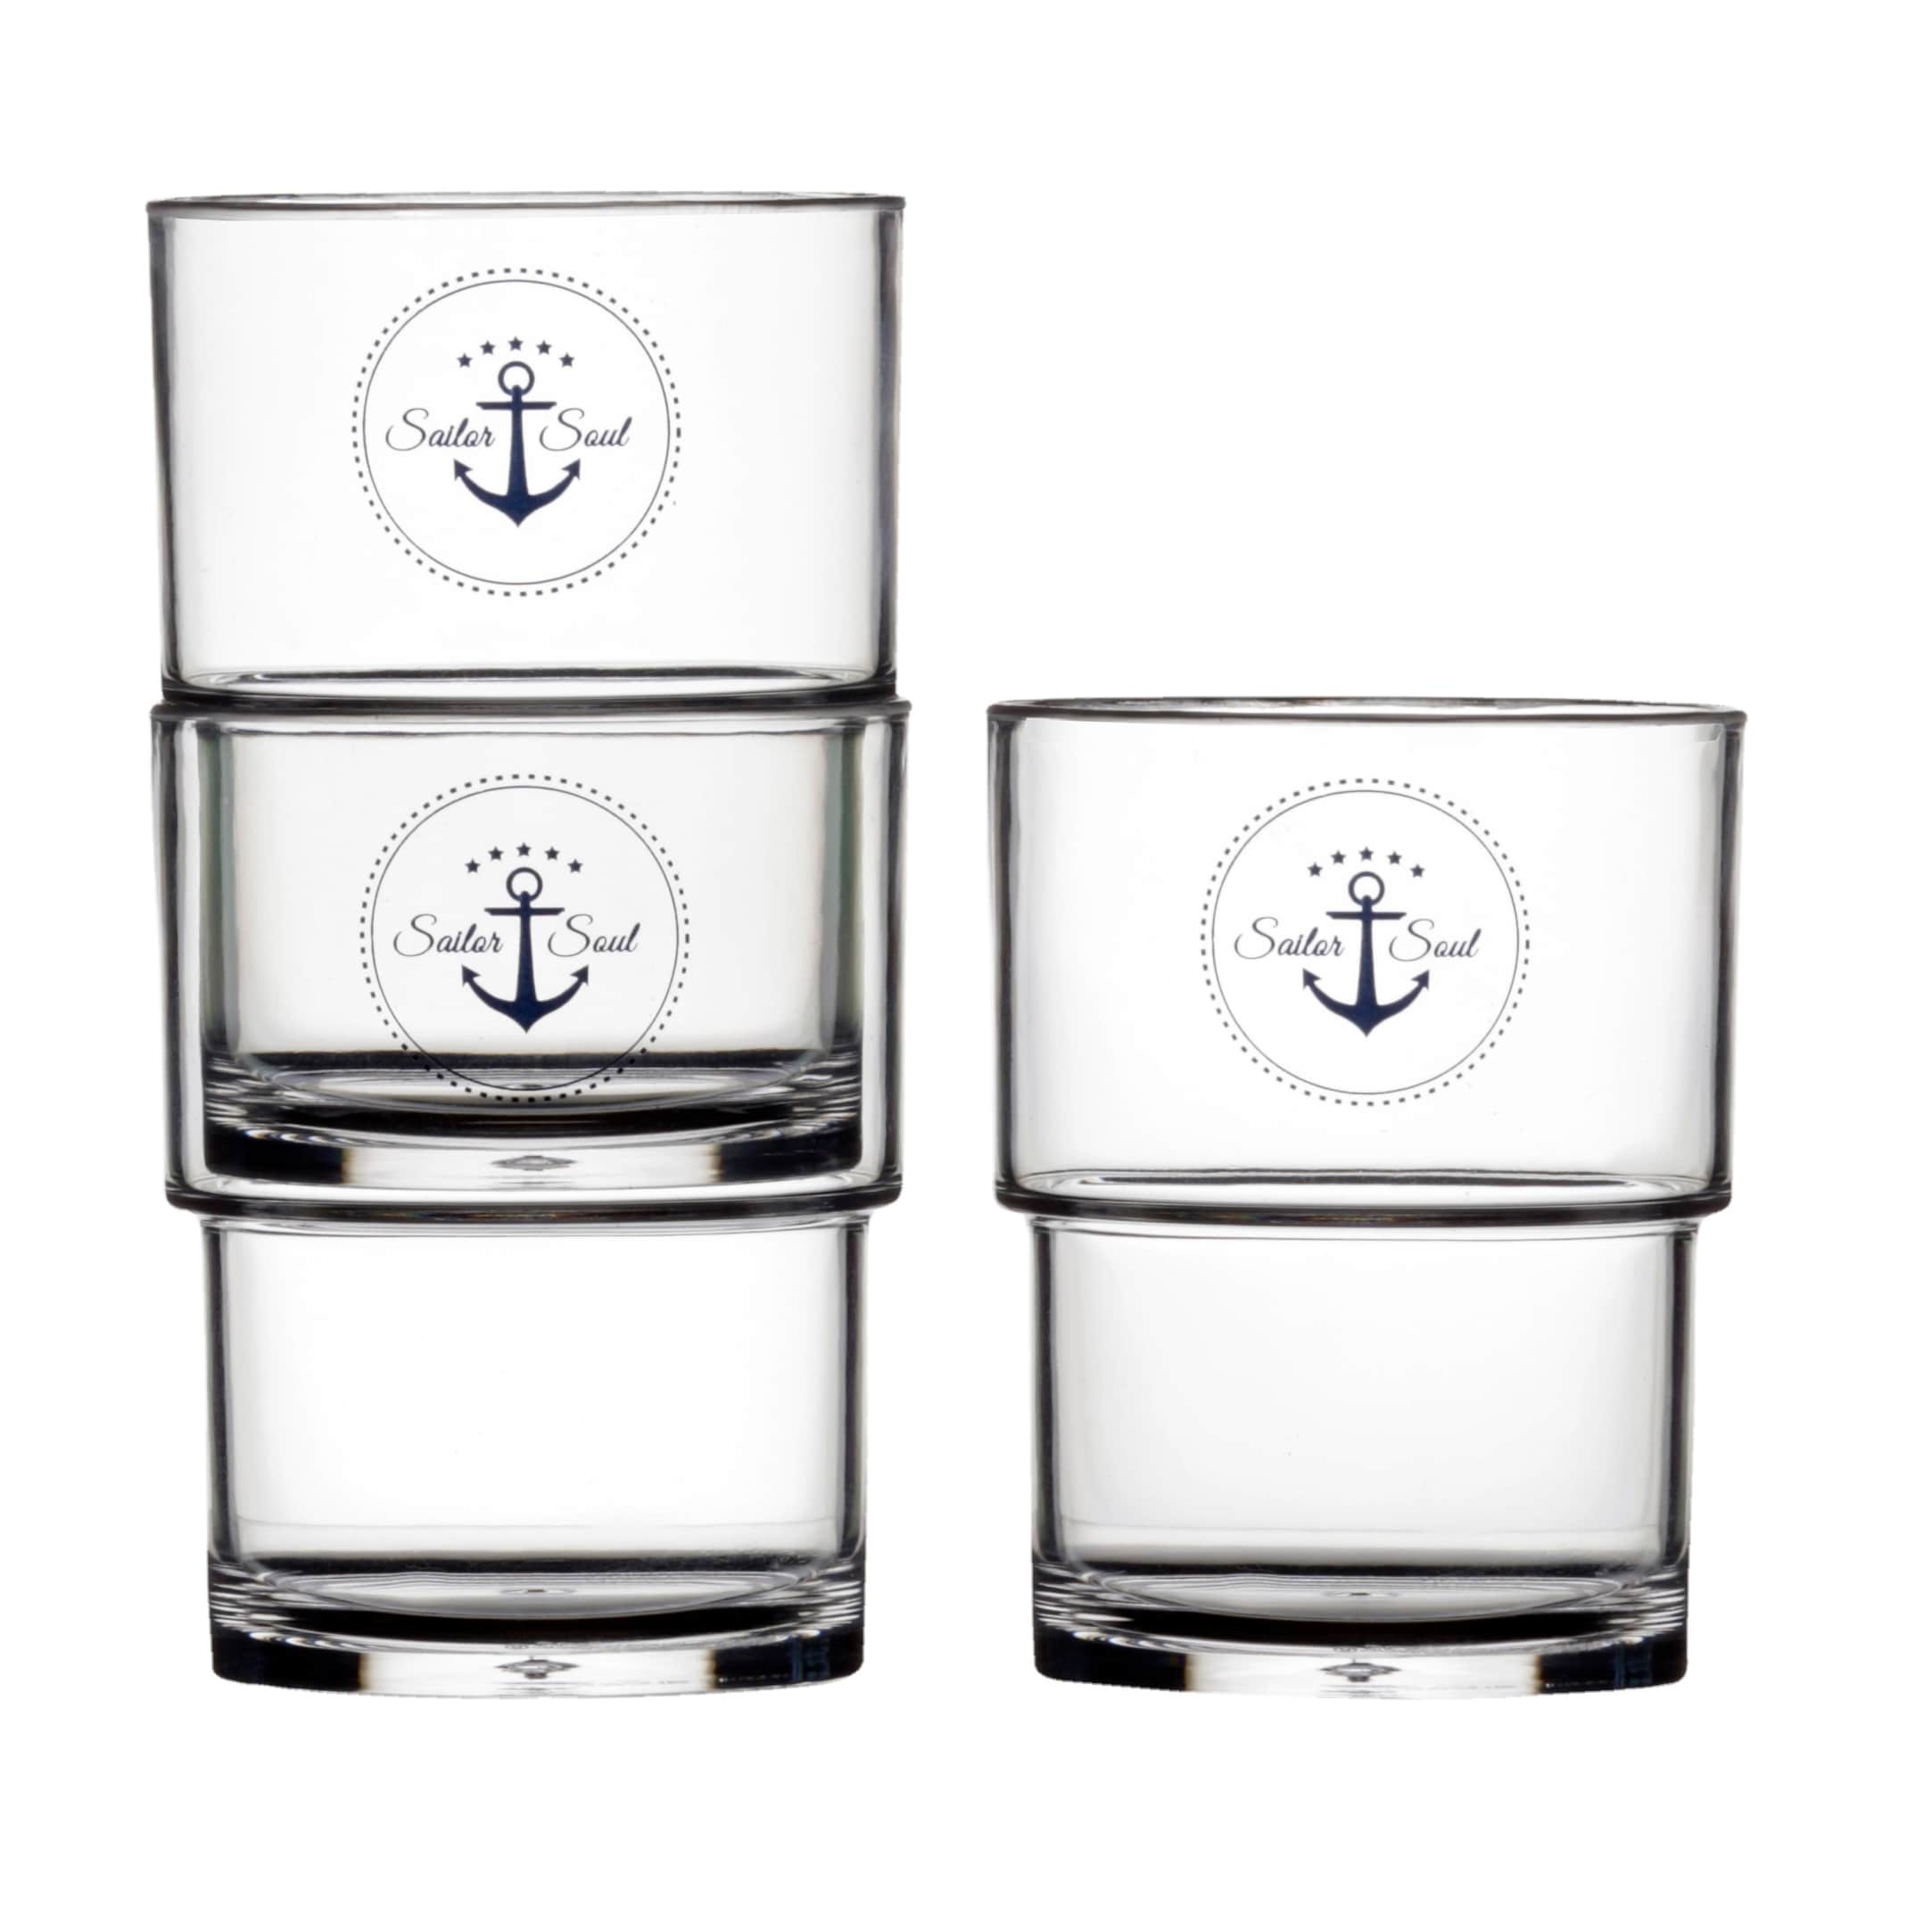 https://ak1.ostkcdn.com/images/products/is/images/direct/bcd19c89f6dcf93568a8c2307ee0852625b62019/Sailor-Soul-Stackable-Glass---Set-of-12.jpg